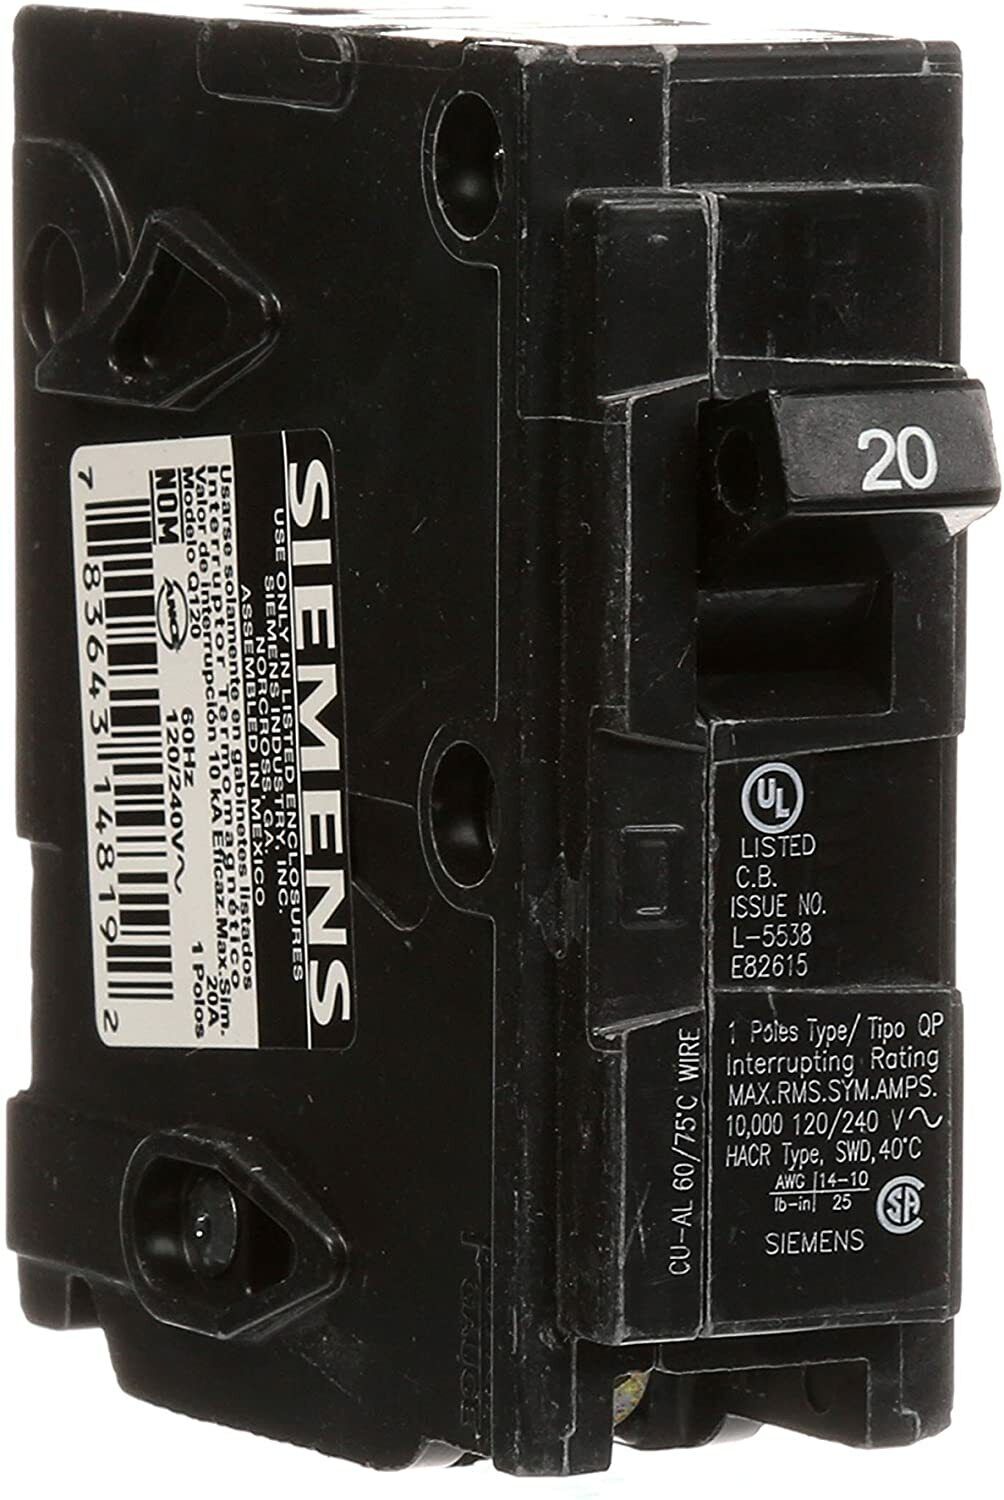 Bargain Siemens 5 Units Q120 20 Amp Single Circuit Type Breake Special price for a limited time QP Pole